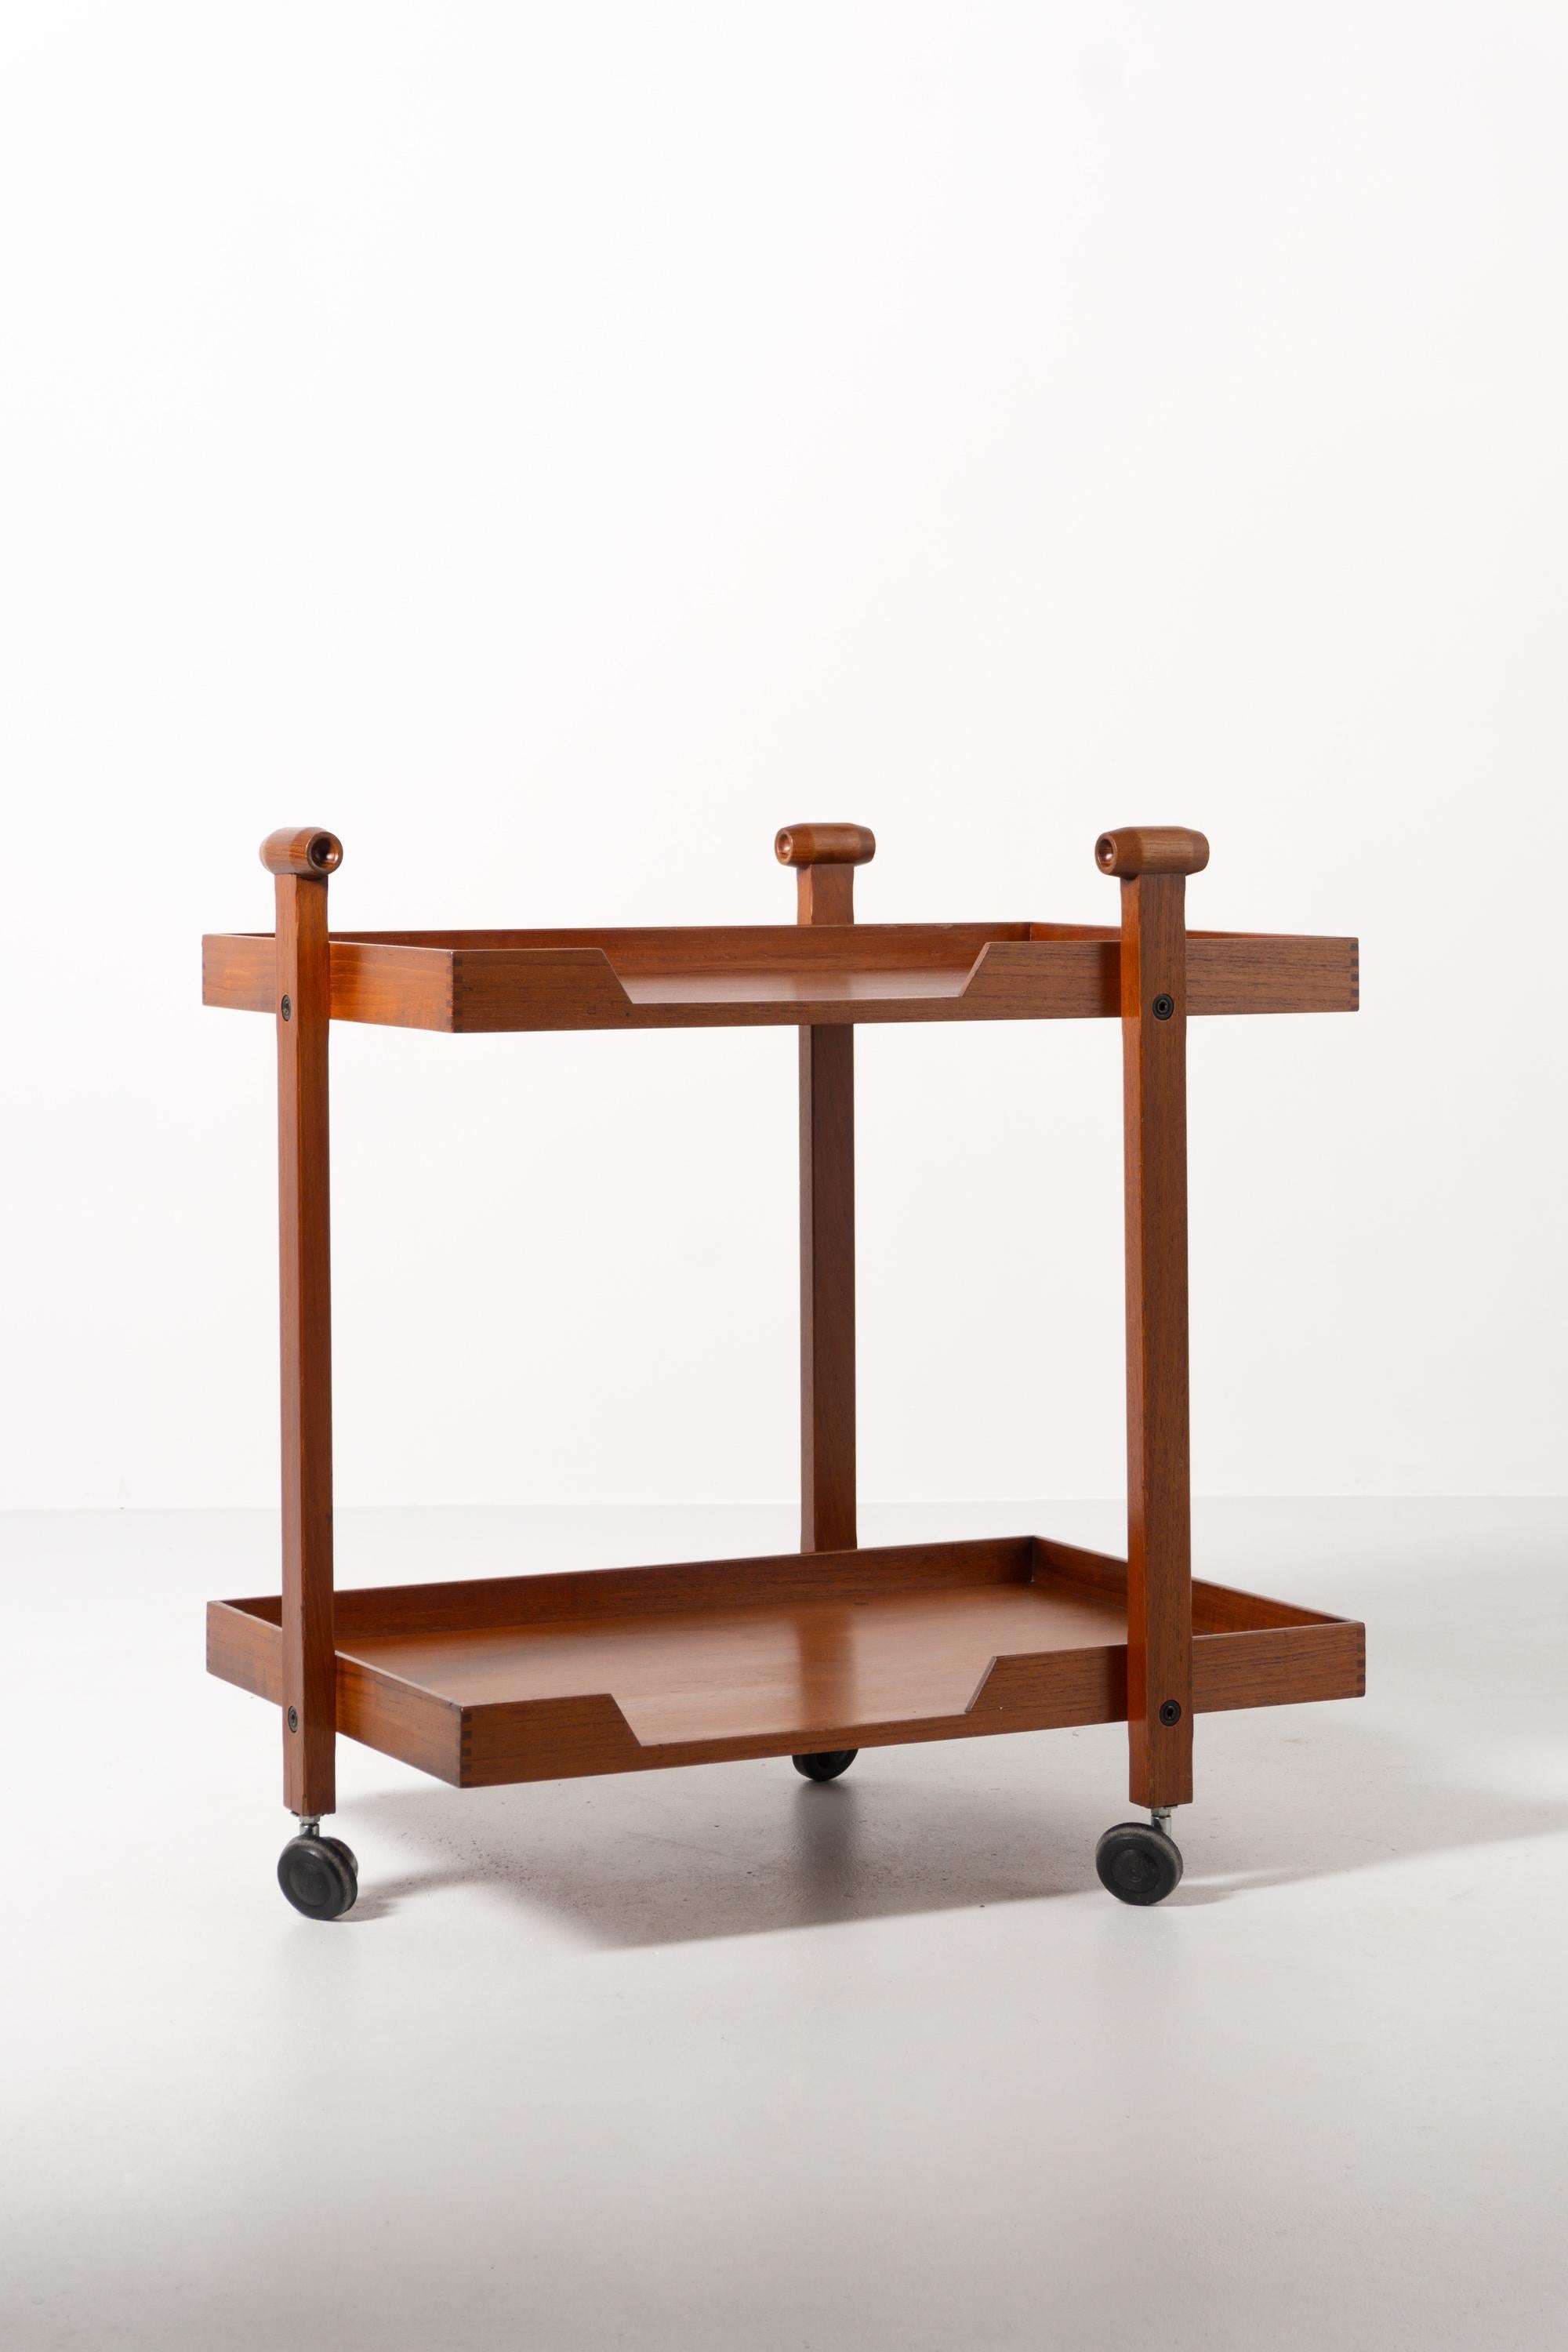 This elegant serving cart (model CR20) made of solid teak as well as plywood impresses with its simplicity. The two tableau level is flanked by three struts placed on casters. Designed by Franco Albini in 1958, who for a short time also worked in